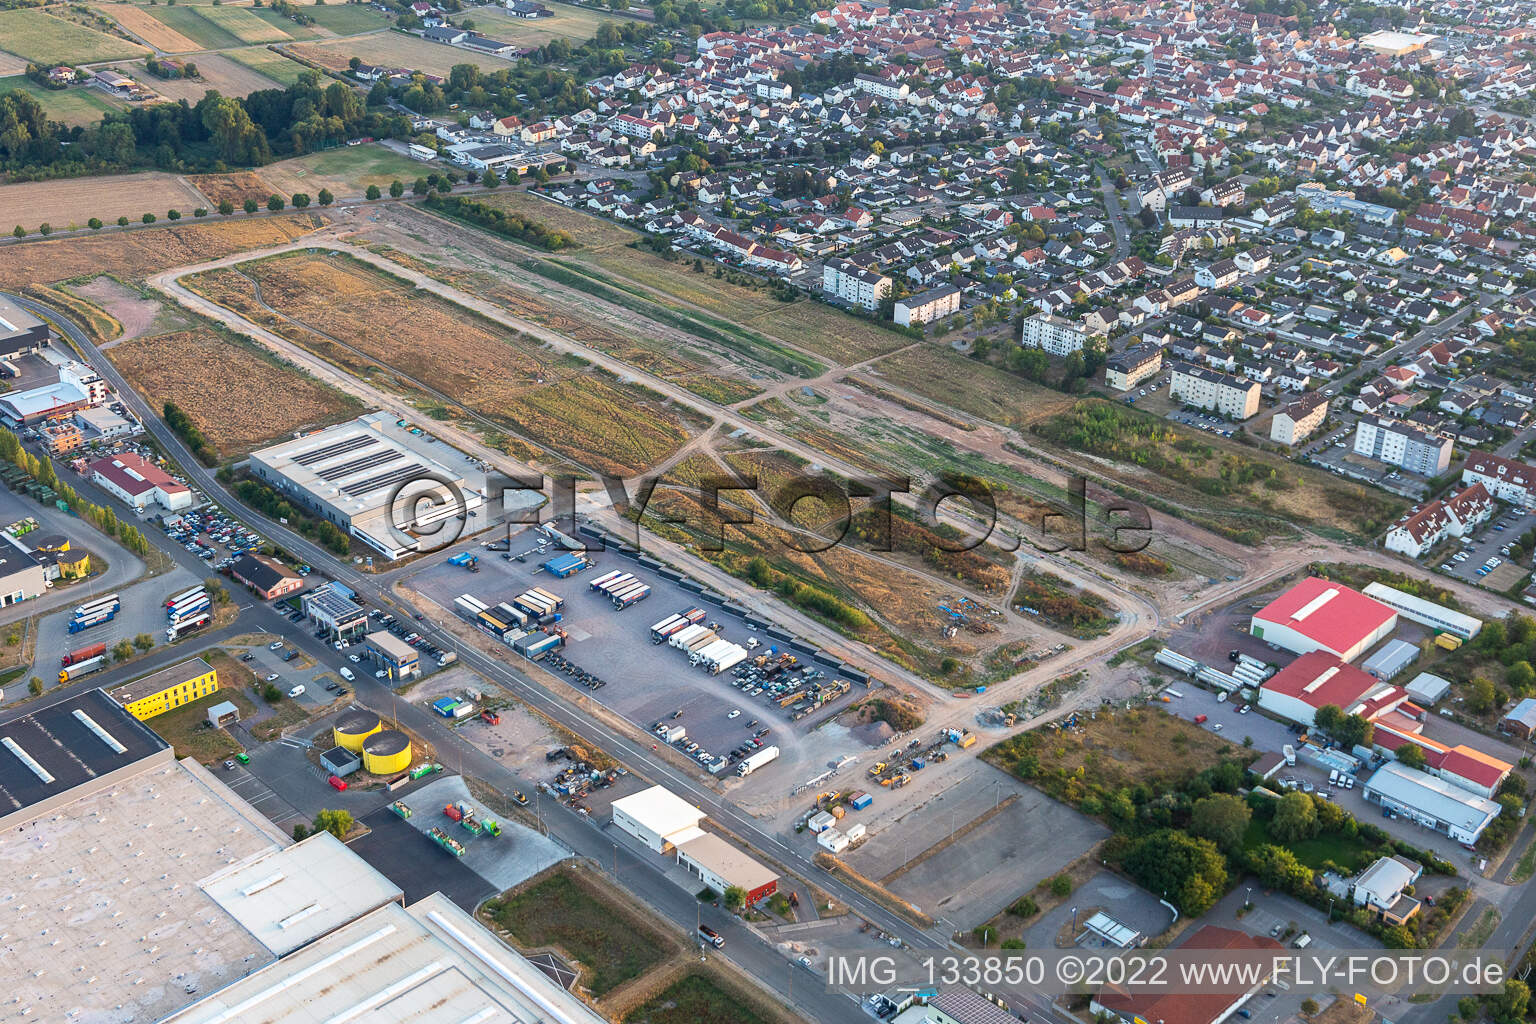 Expansion area for the Interpark commercial area in Offenbach an der Queich in the state Rhineland-Palatinate, Germany